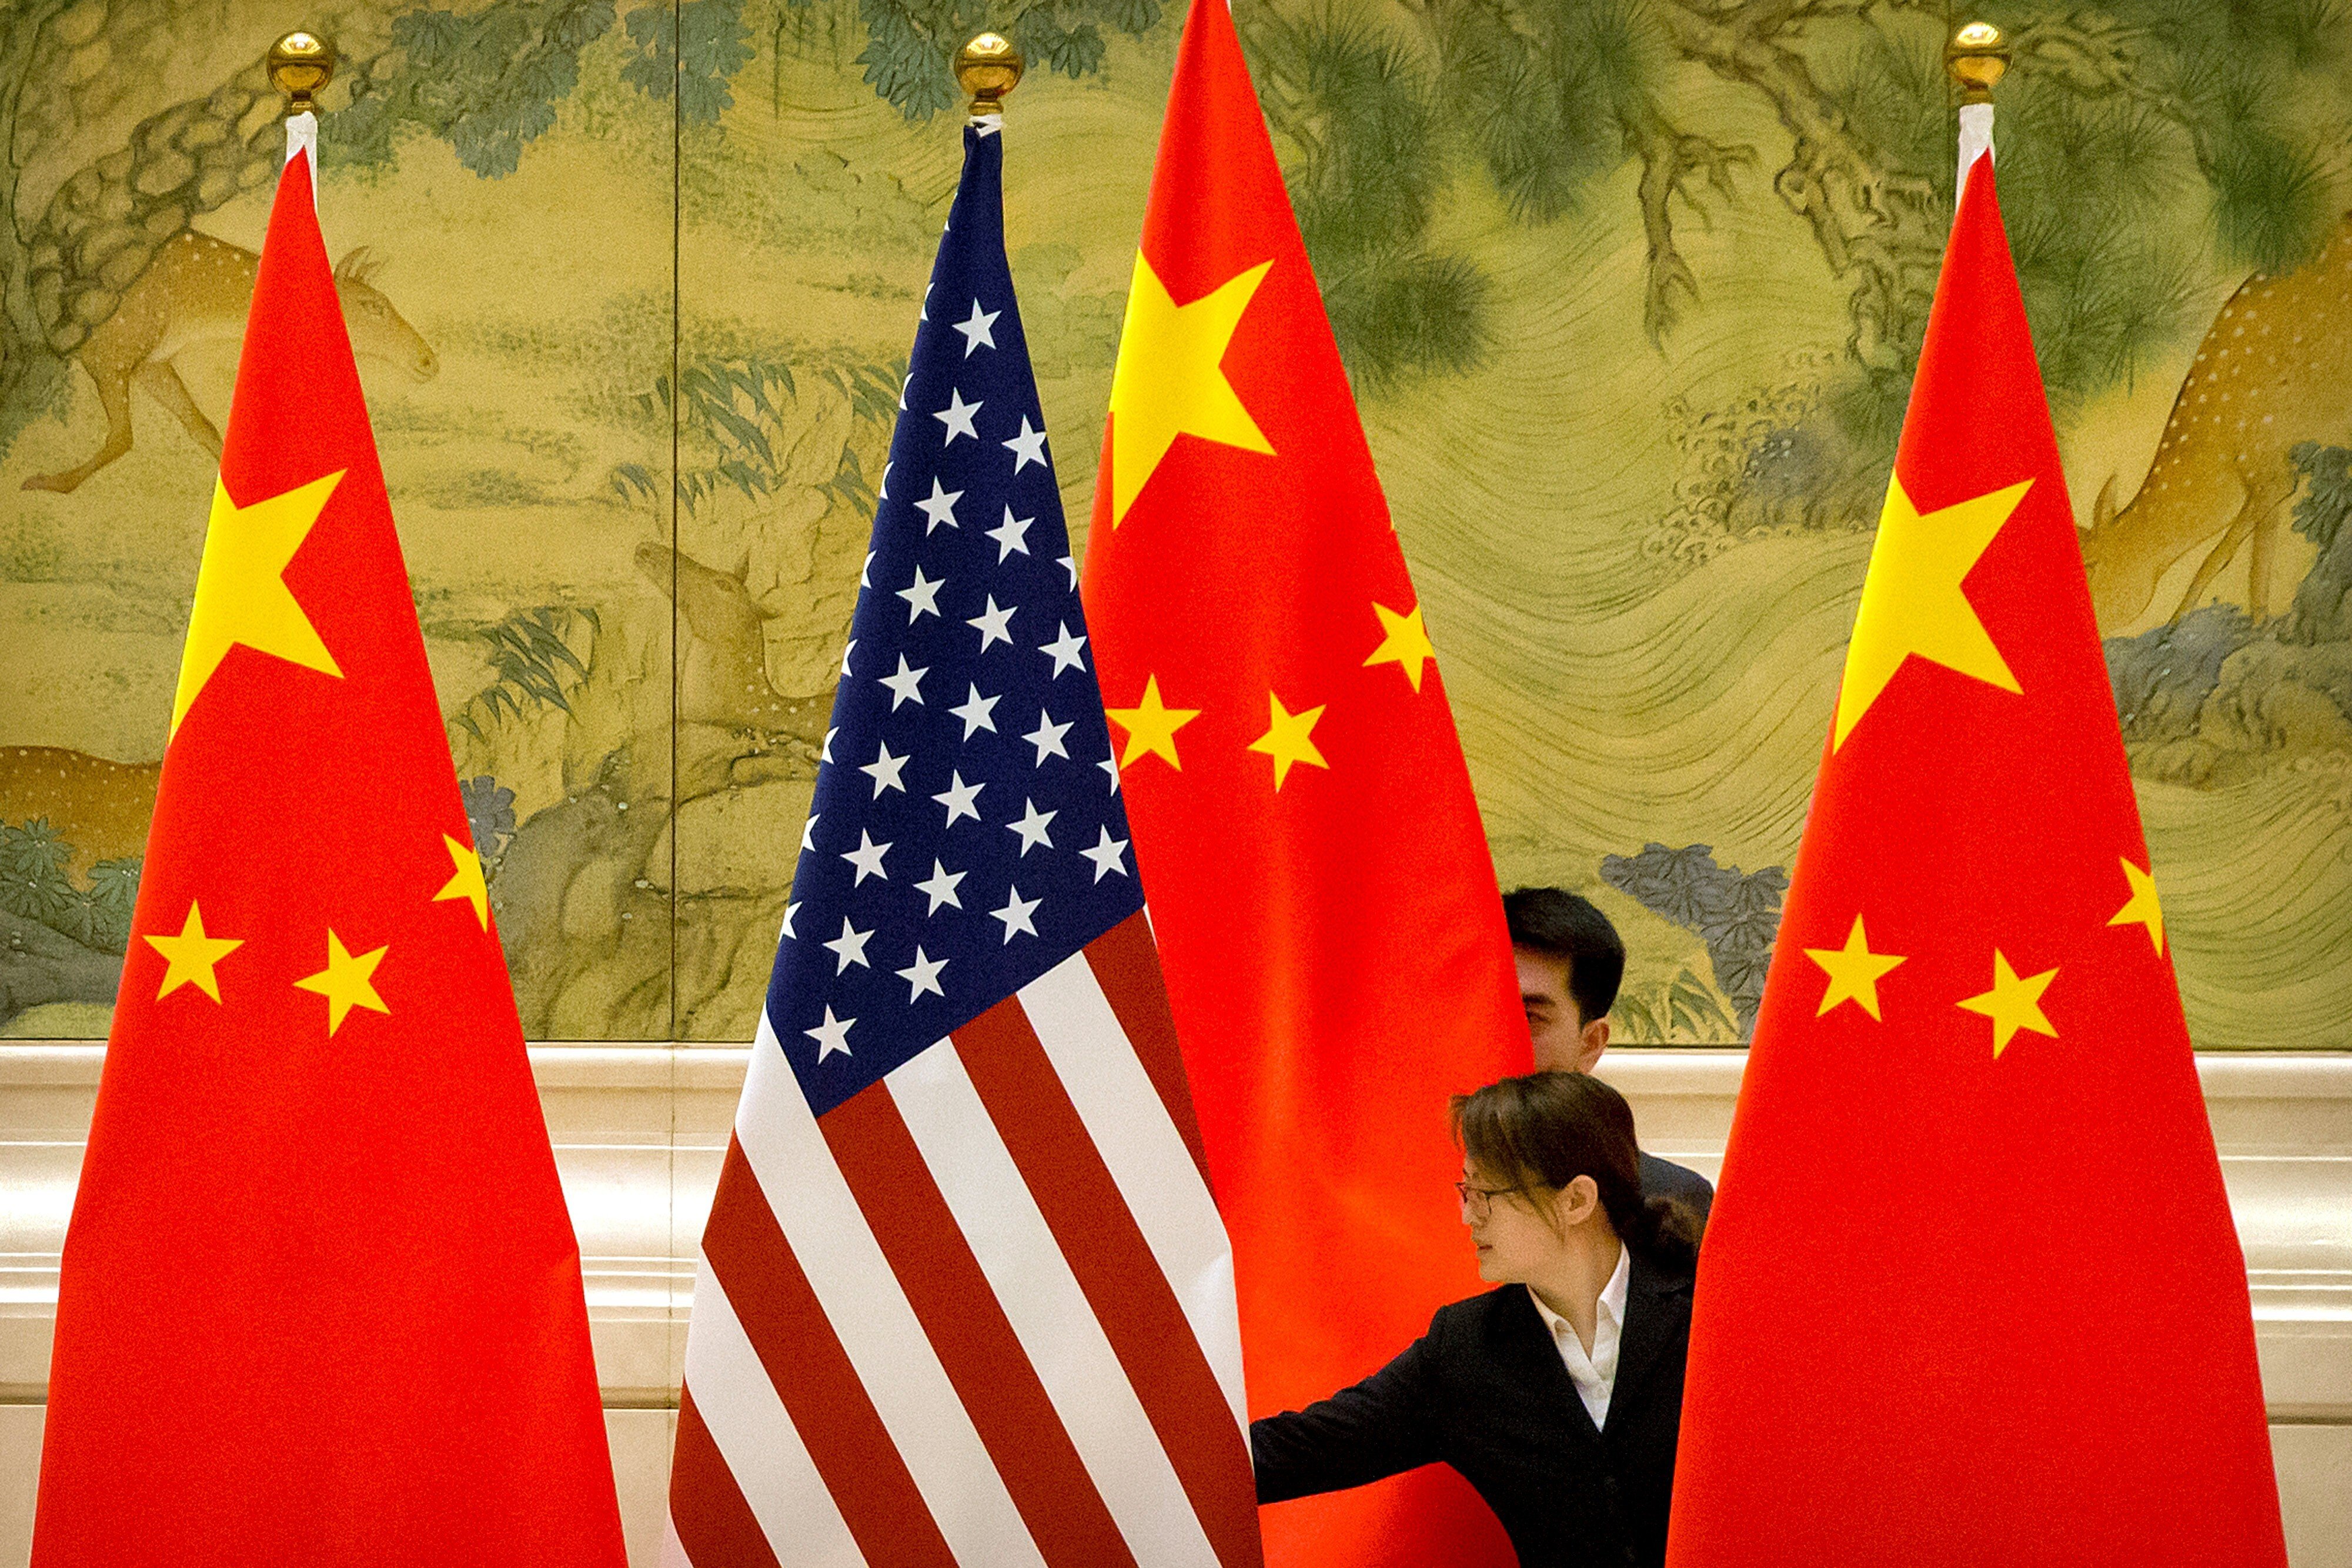 US and Chinese flags are adjusted before the opening session of negotiations between US and Chinese trade representatives at the Diaoyutai State Guesthouse in Beijing in February last year. Photo: Reuters